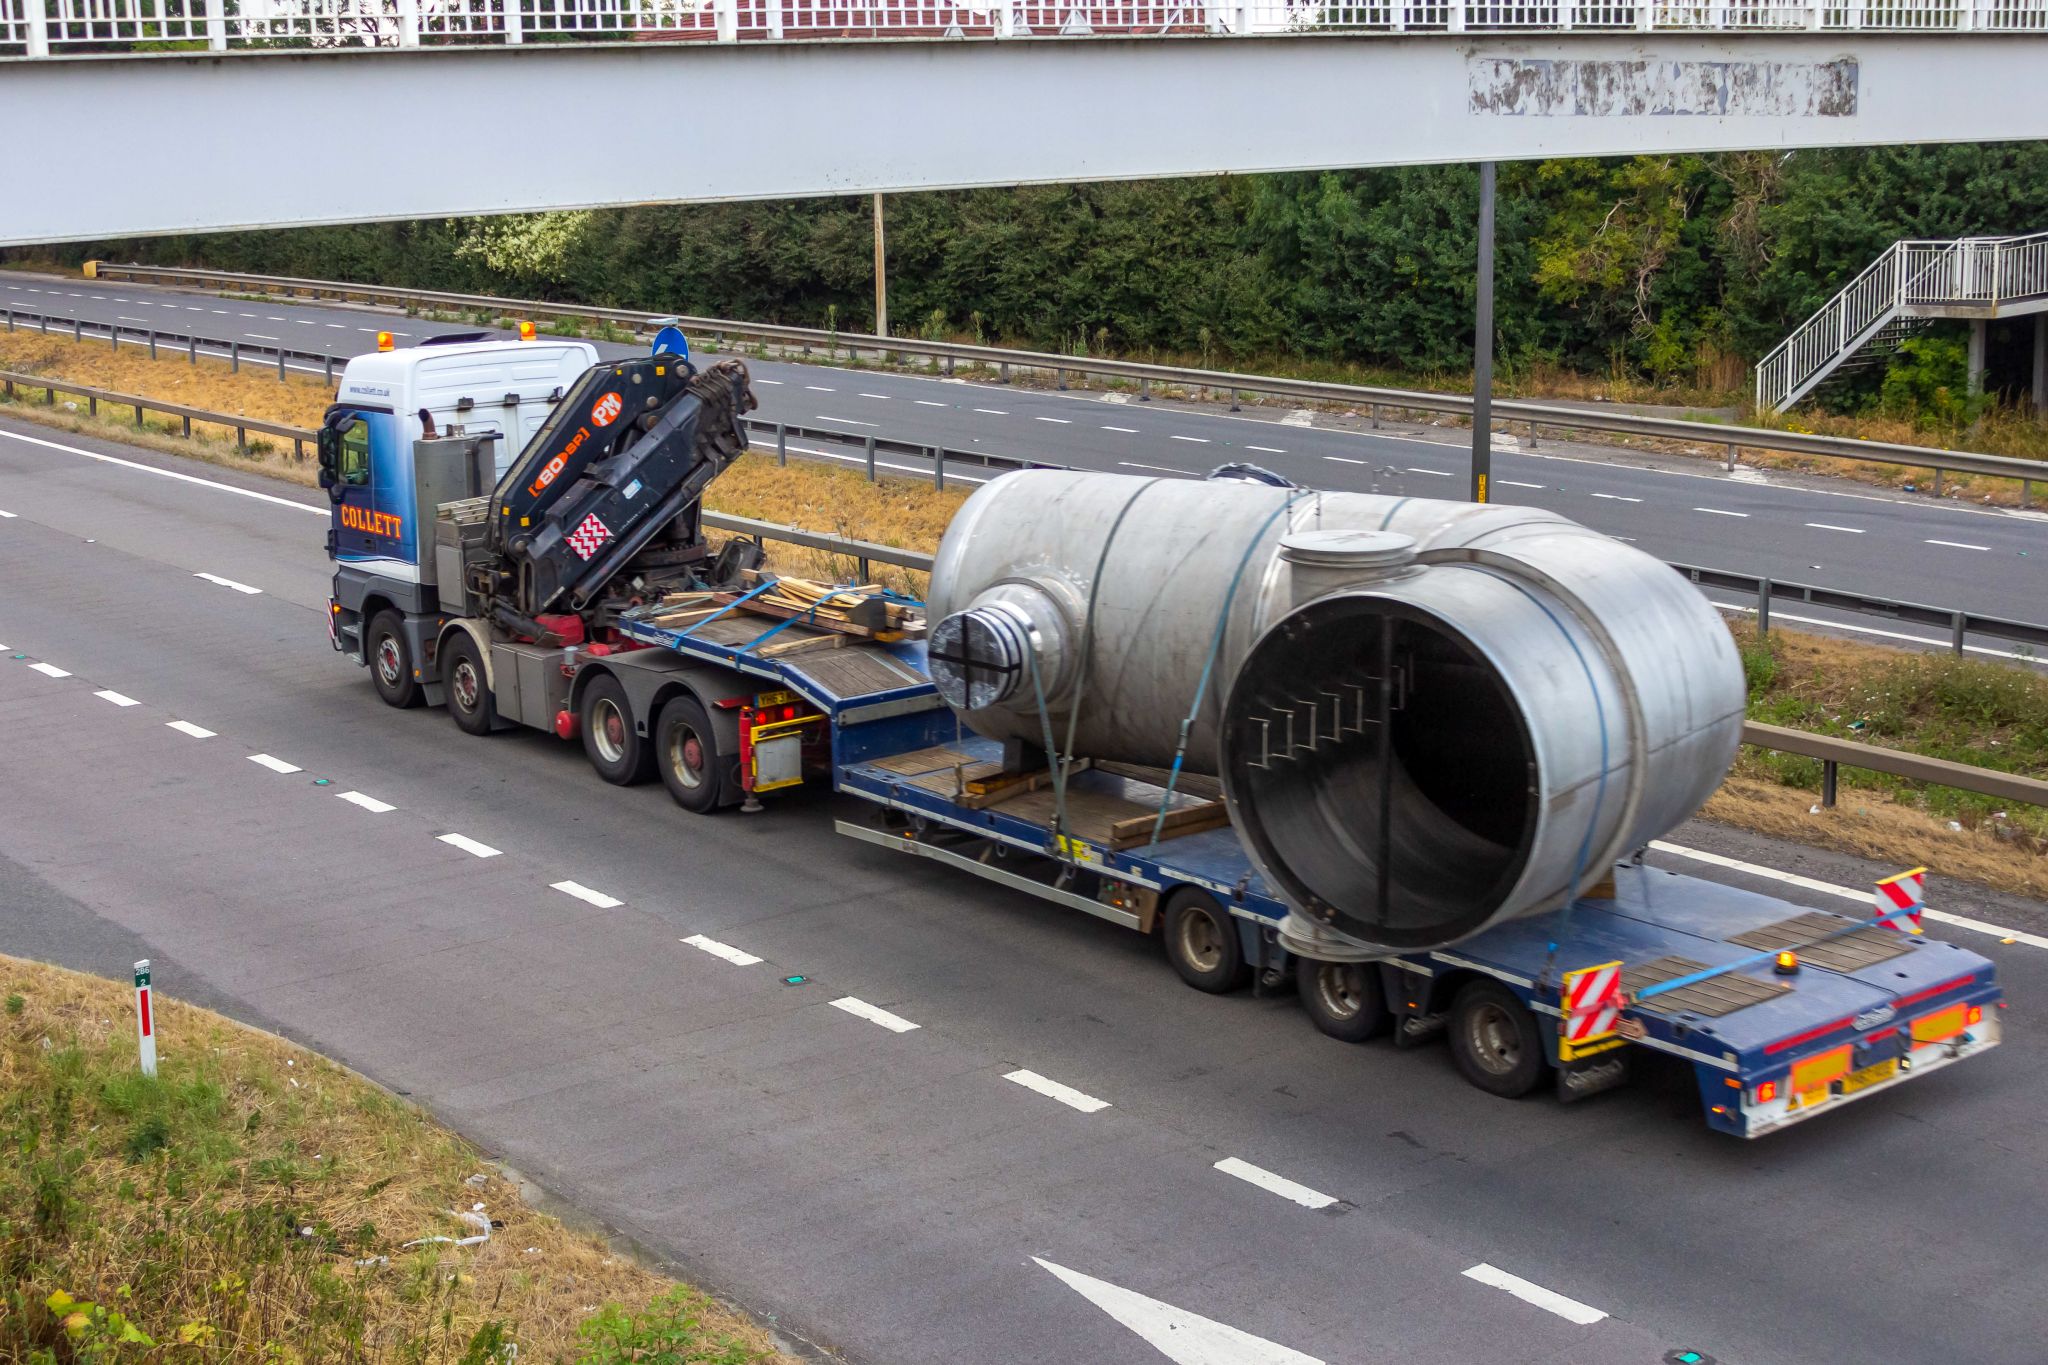 West Midlands – clarity on paying for police to escort abnormal loads